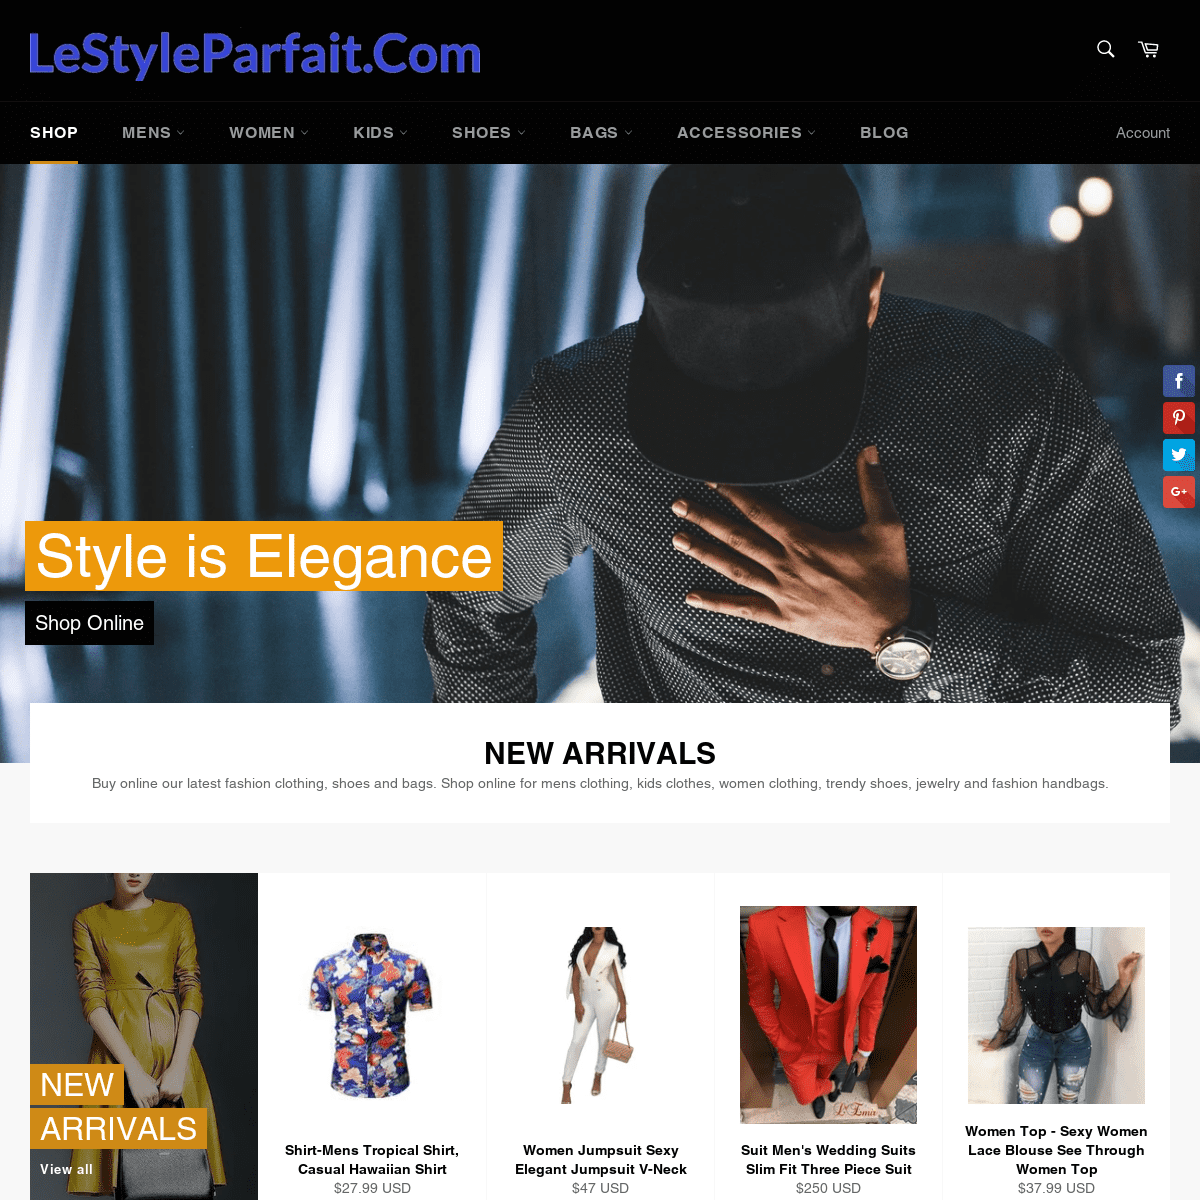 Shopping Online For Clothing, Shoes, Bags | LeStyleParfait.Com